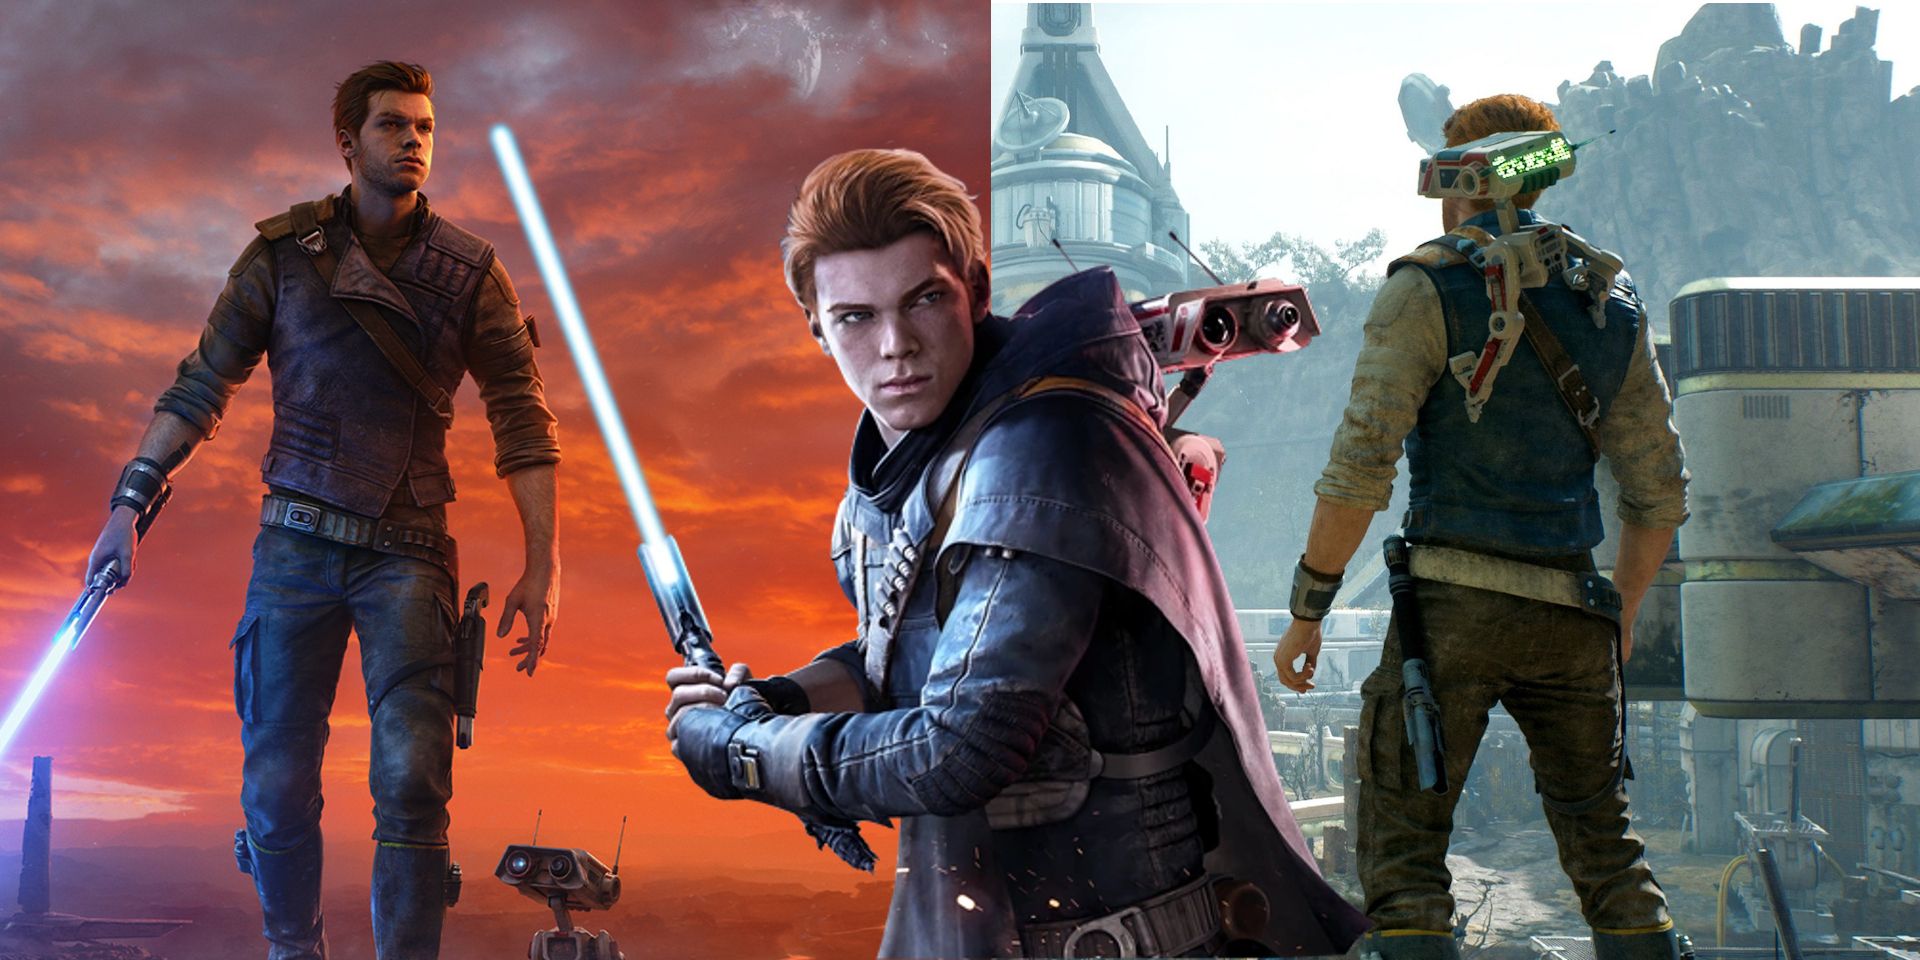 Three versions of Cal Kestis, the protagonist of the Star Wars Jedi games by Respawn Entertainment.